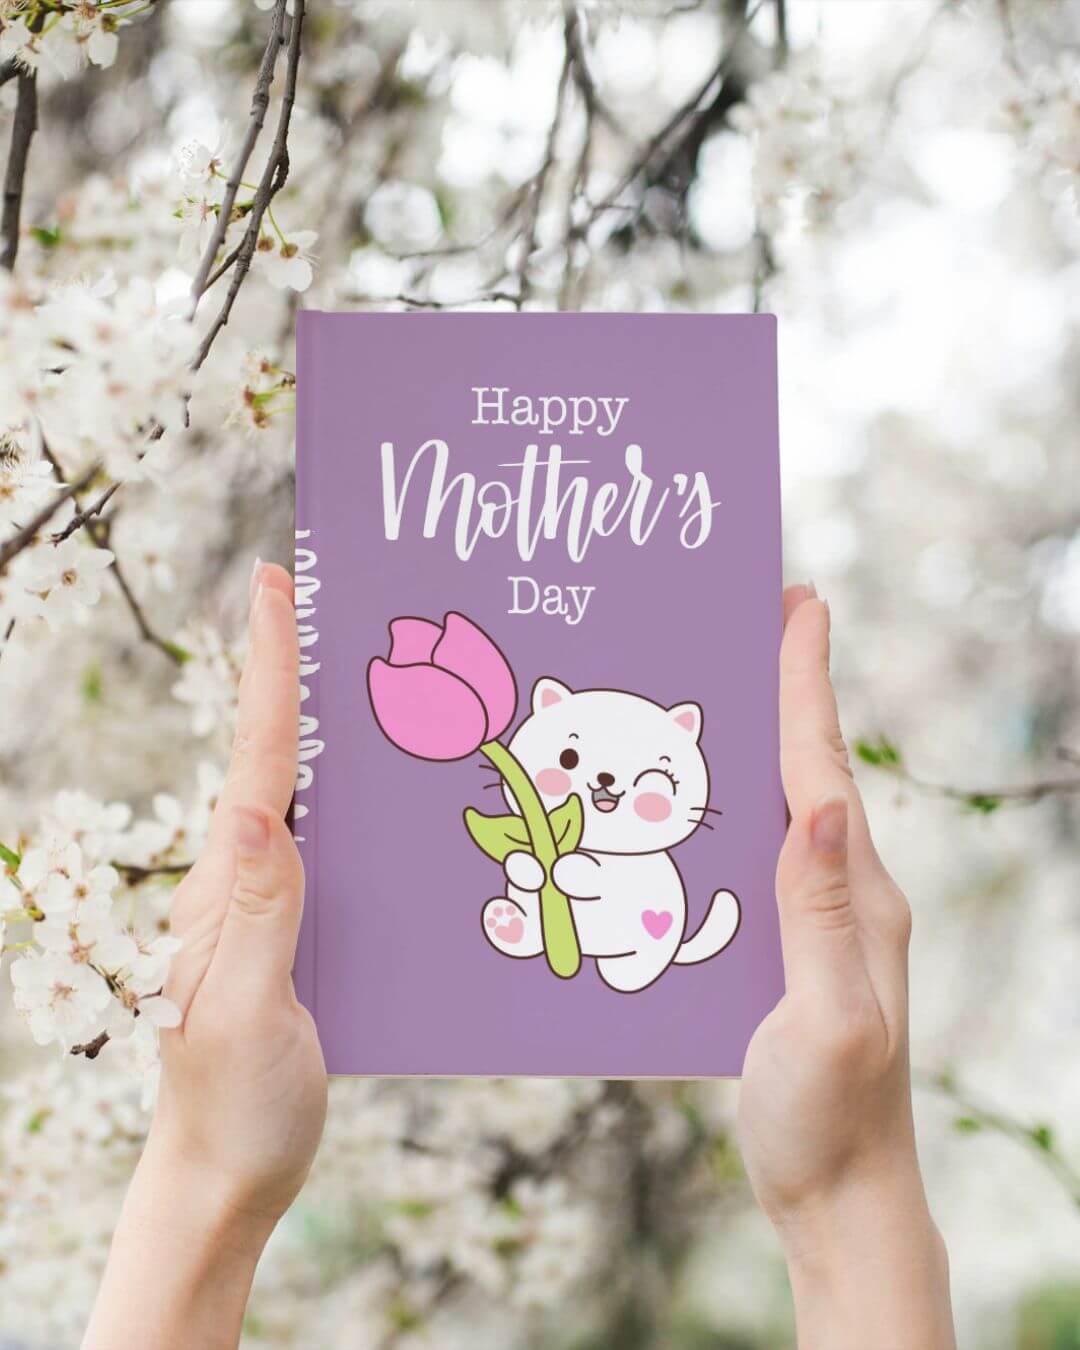 creative gifts for mothers day